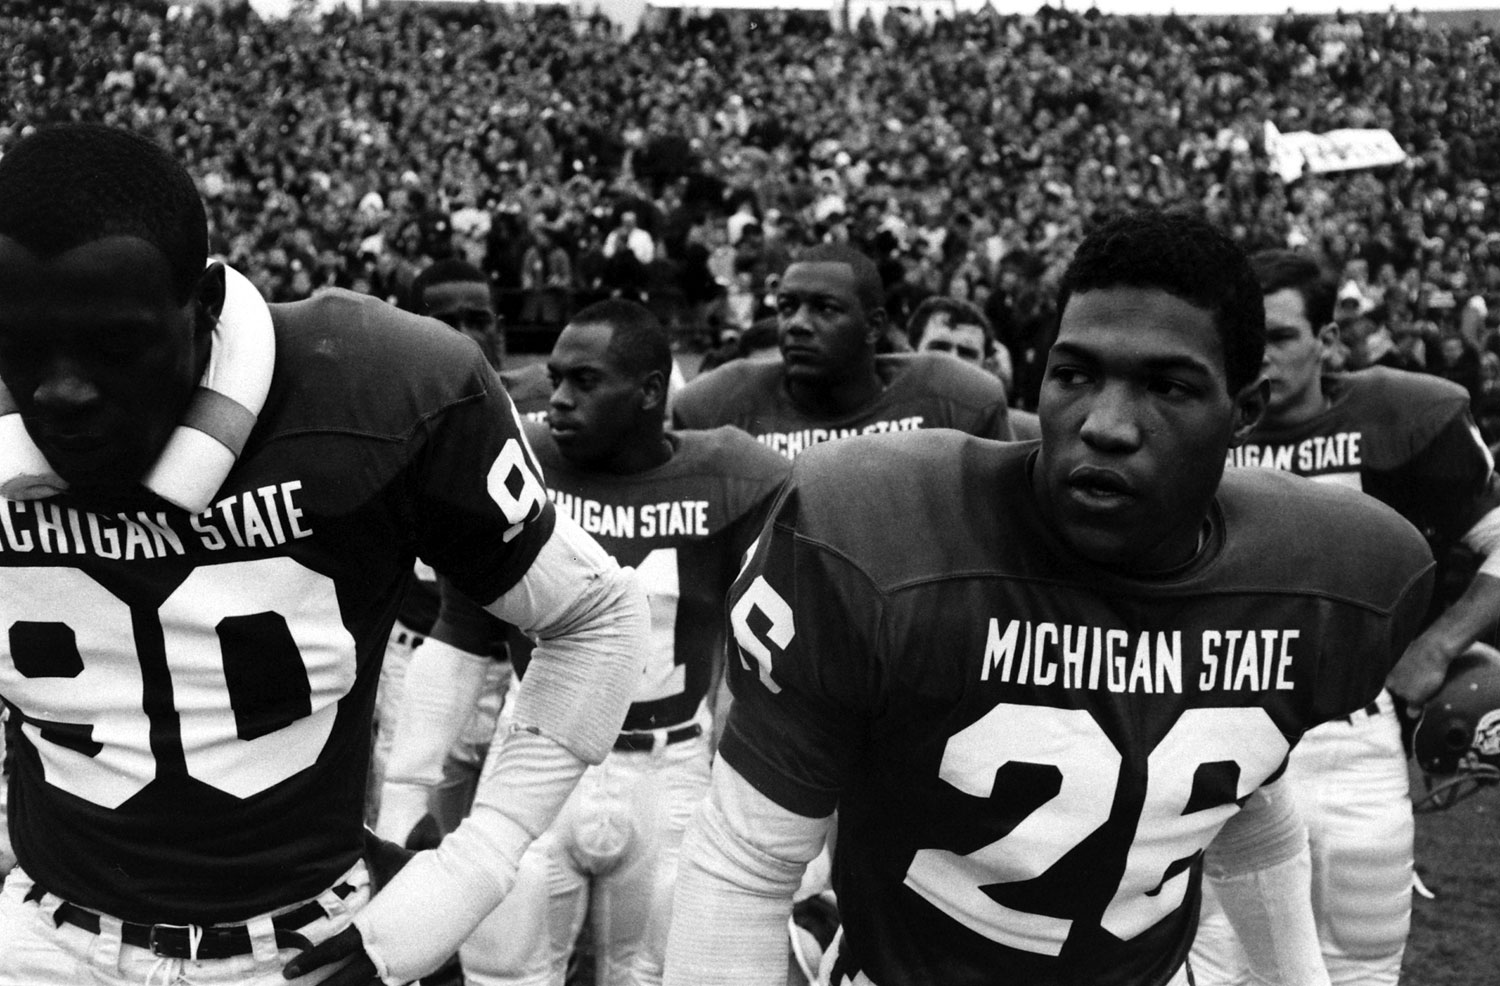 Michigan State Spartans before their "Game of the Century" against Notre Dame, 1966.